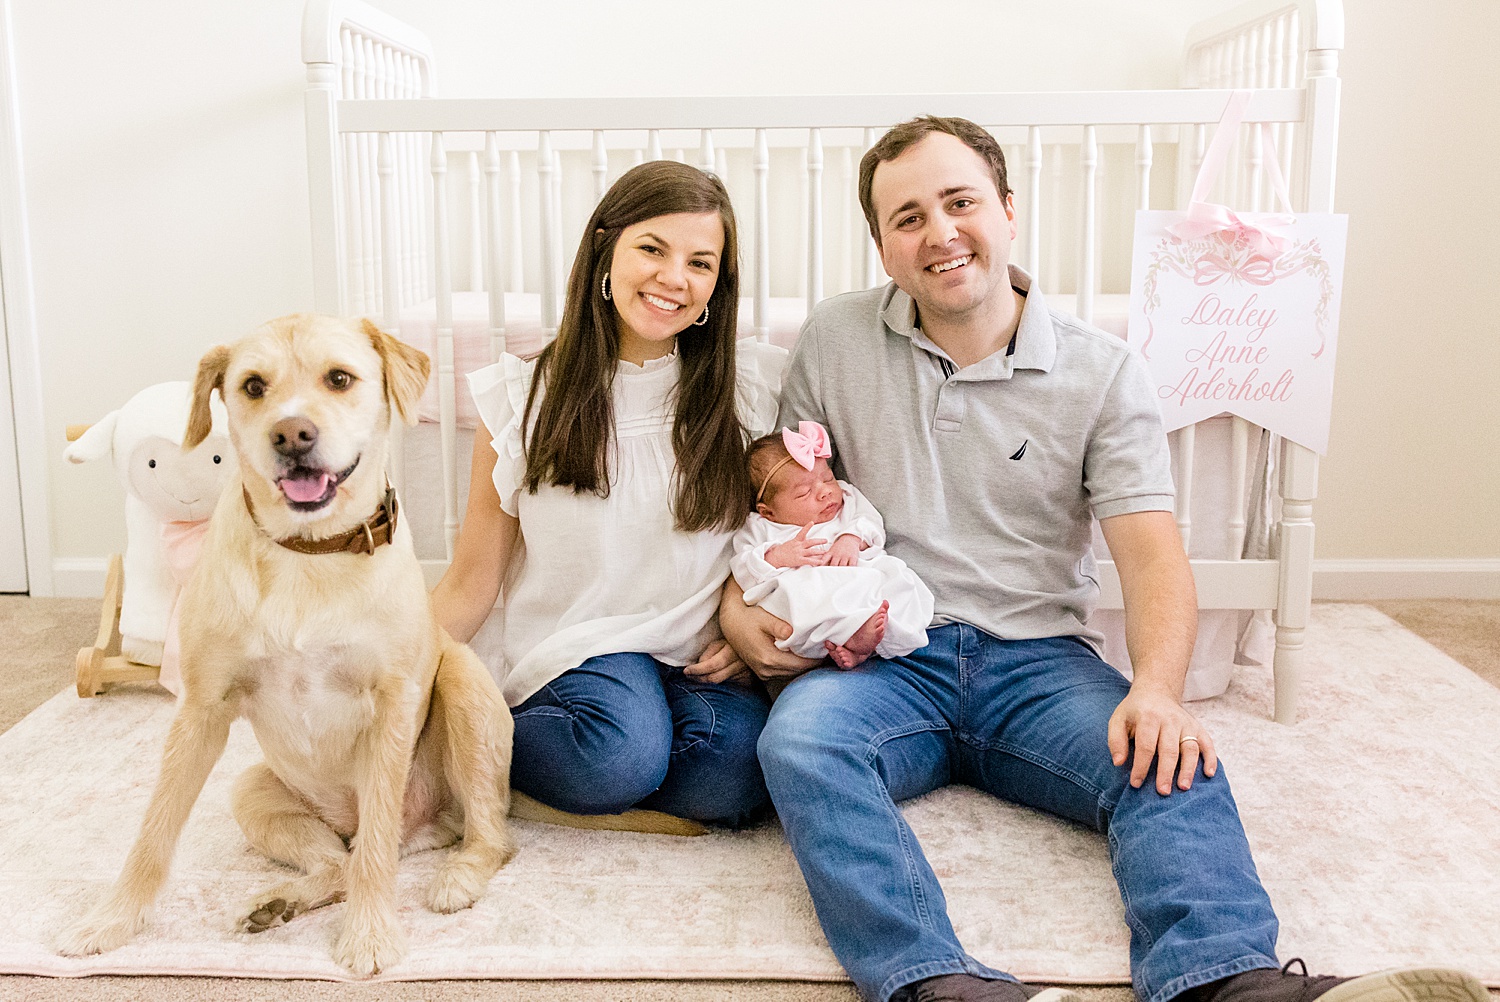 in-home newborn session in nursery with family dog